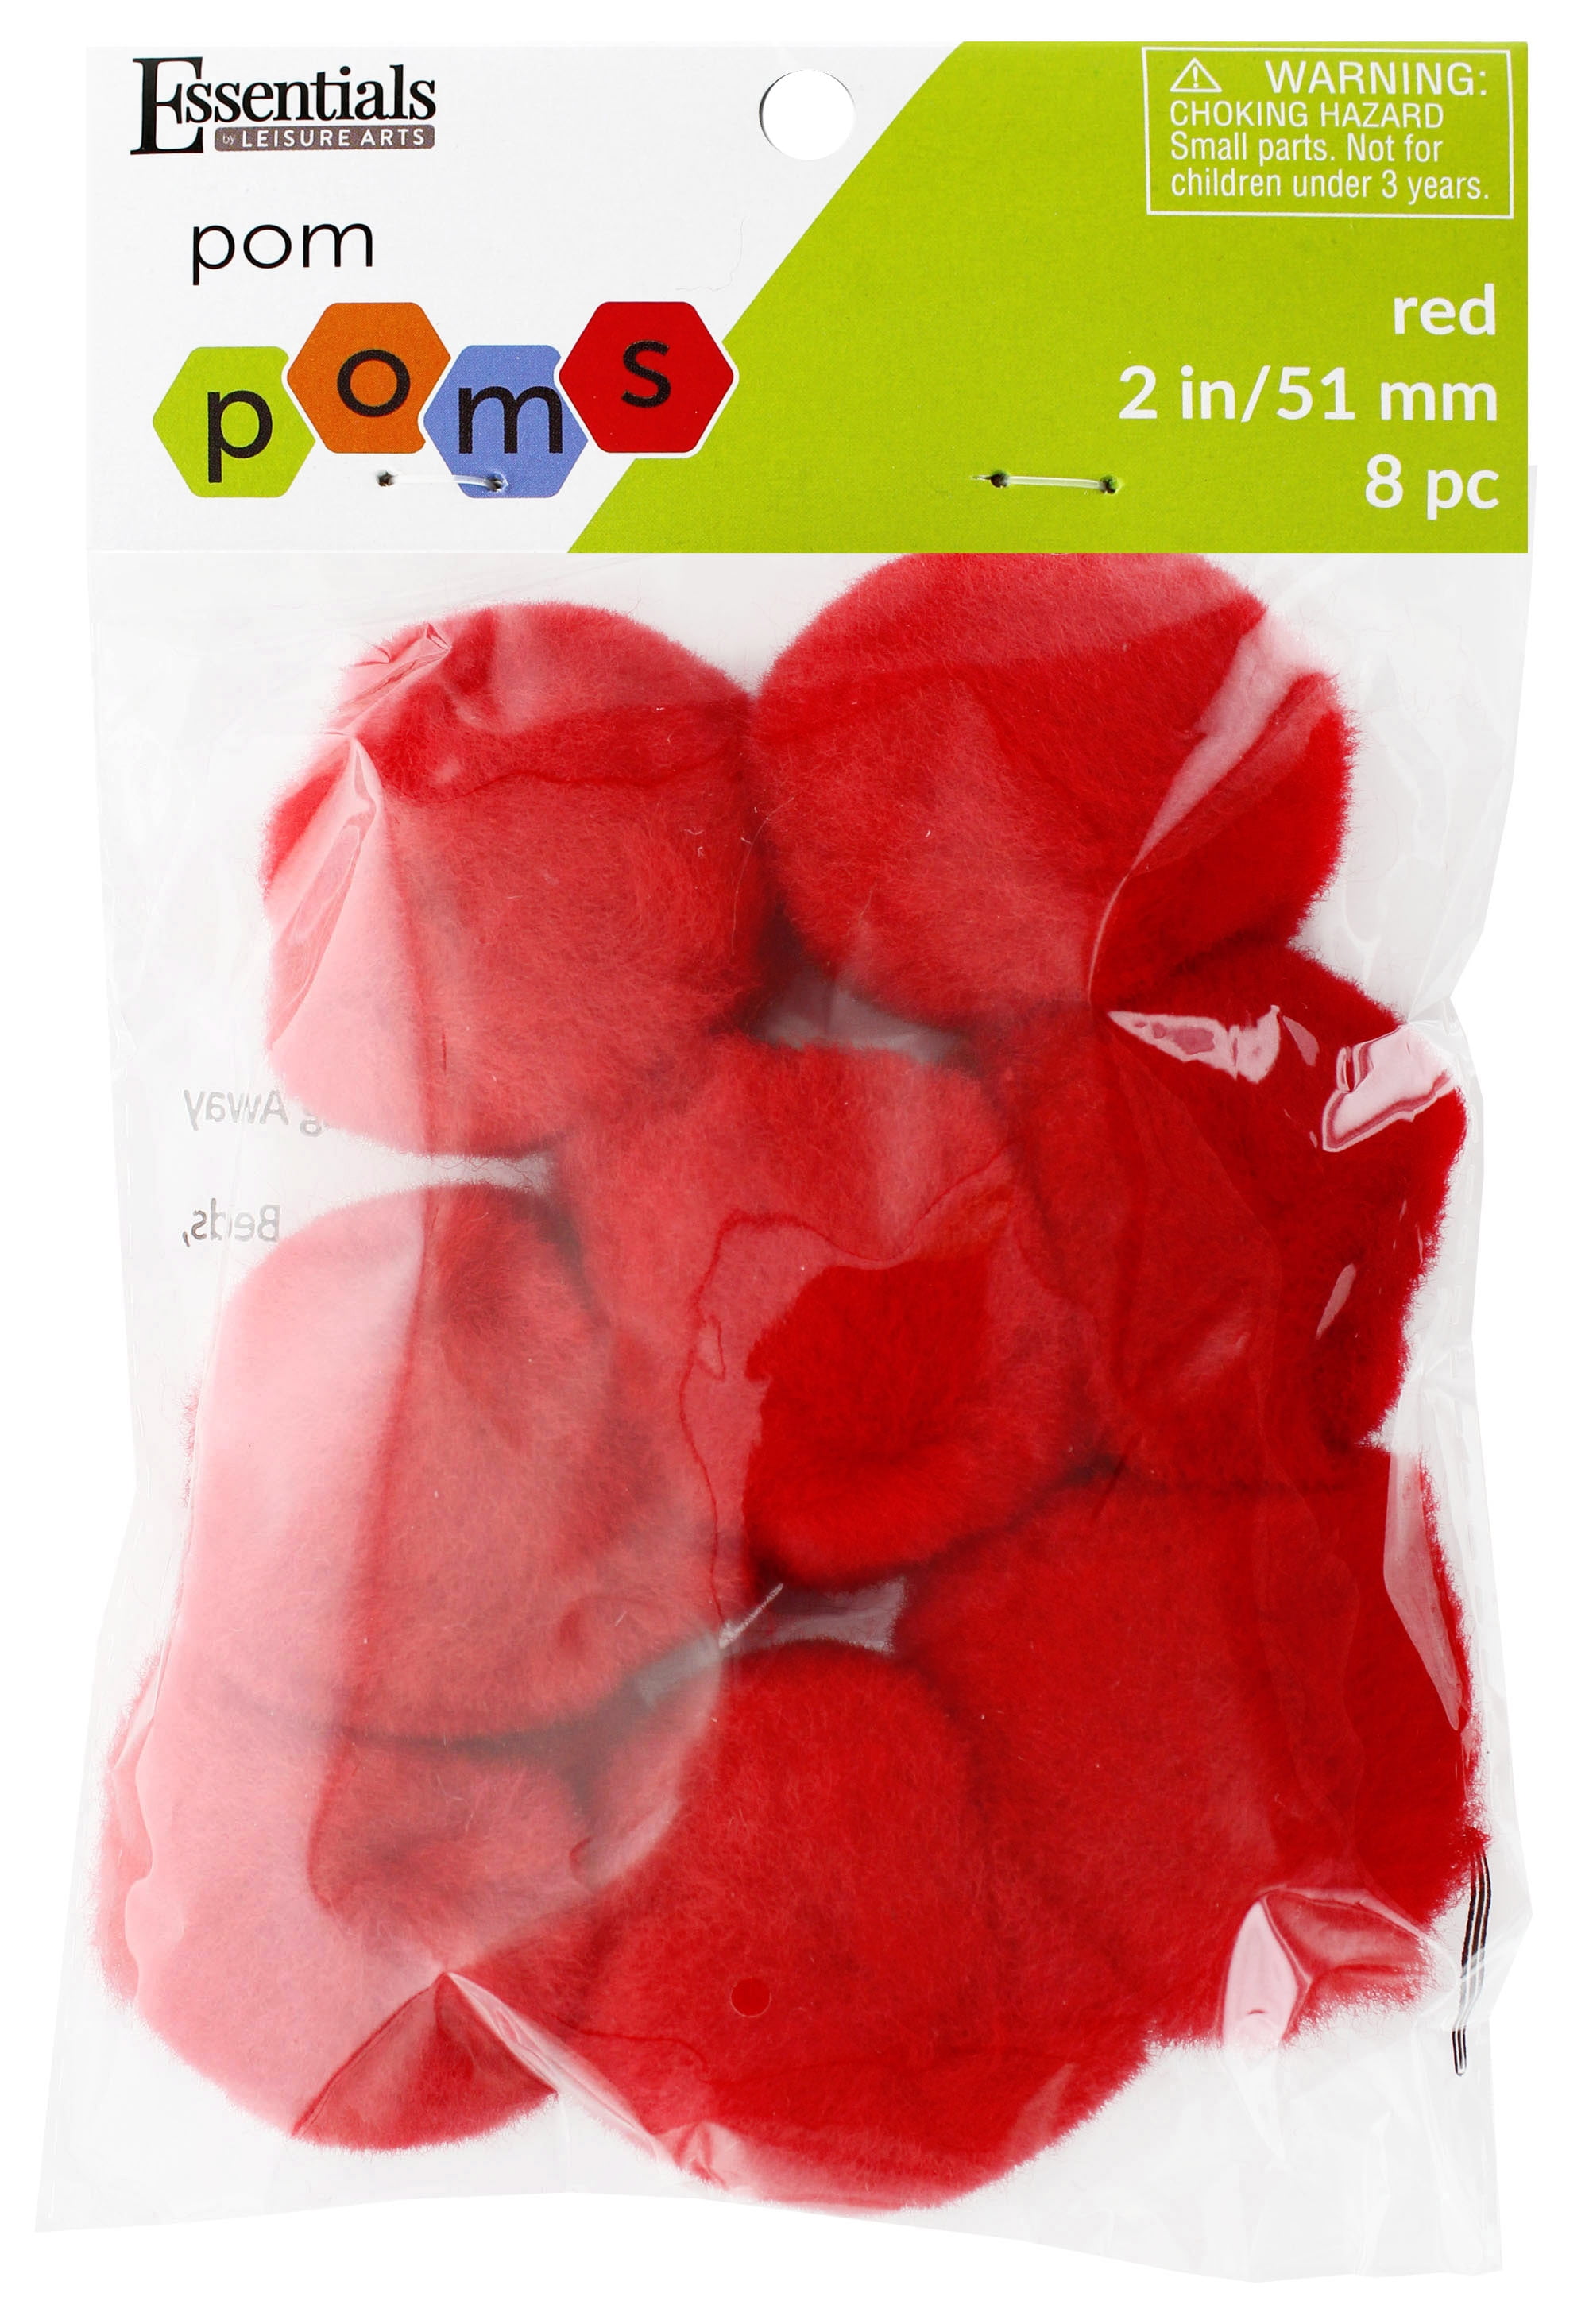 READY 2 LEARN Pom Poms - Set of 240 - Assorted Colors - Art Supplies for  DIY Crafts and Hobbies - 1 in. wide